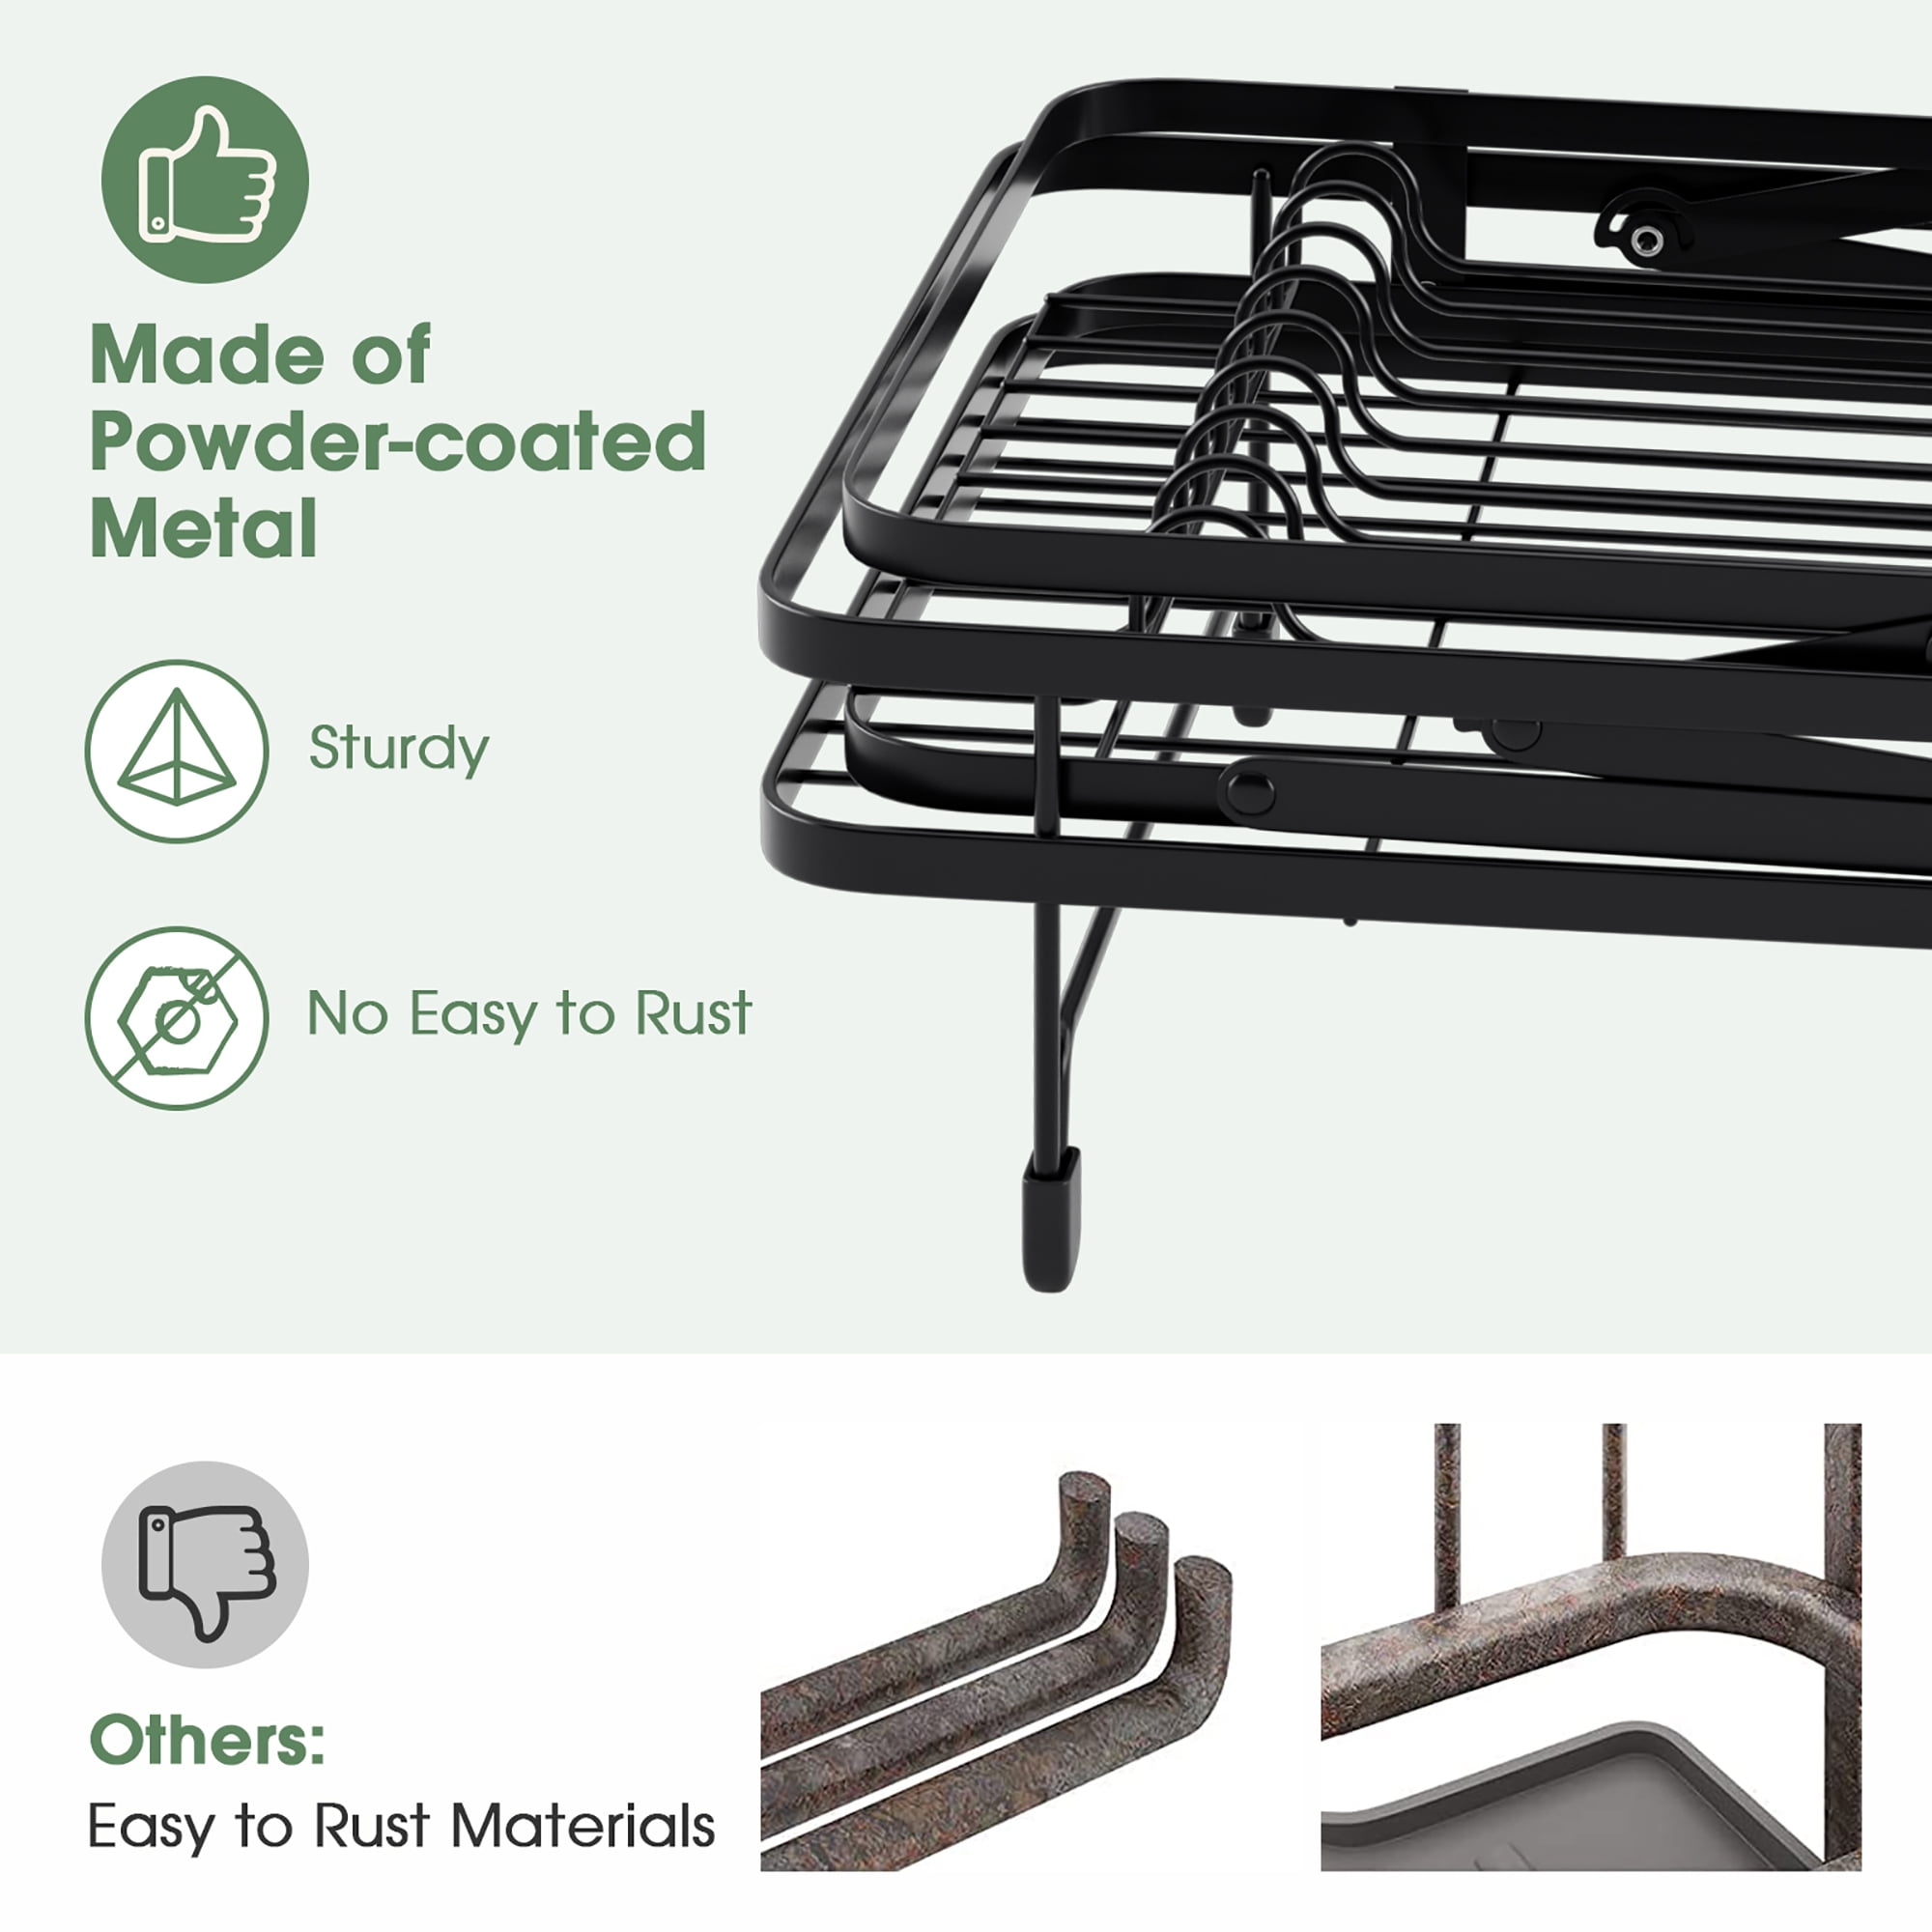 2-Tier Detachable Dish Drying Rack with Cutlery Holder - Costway